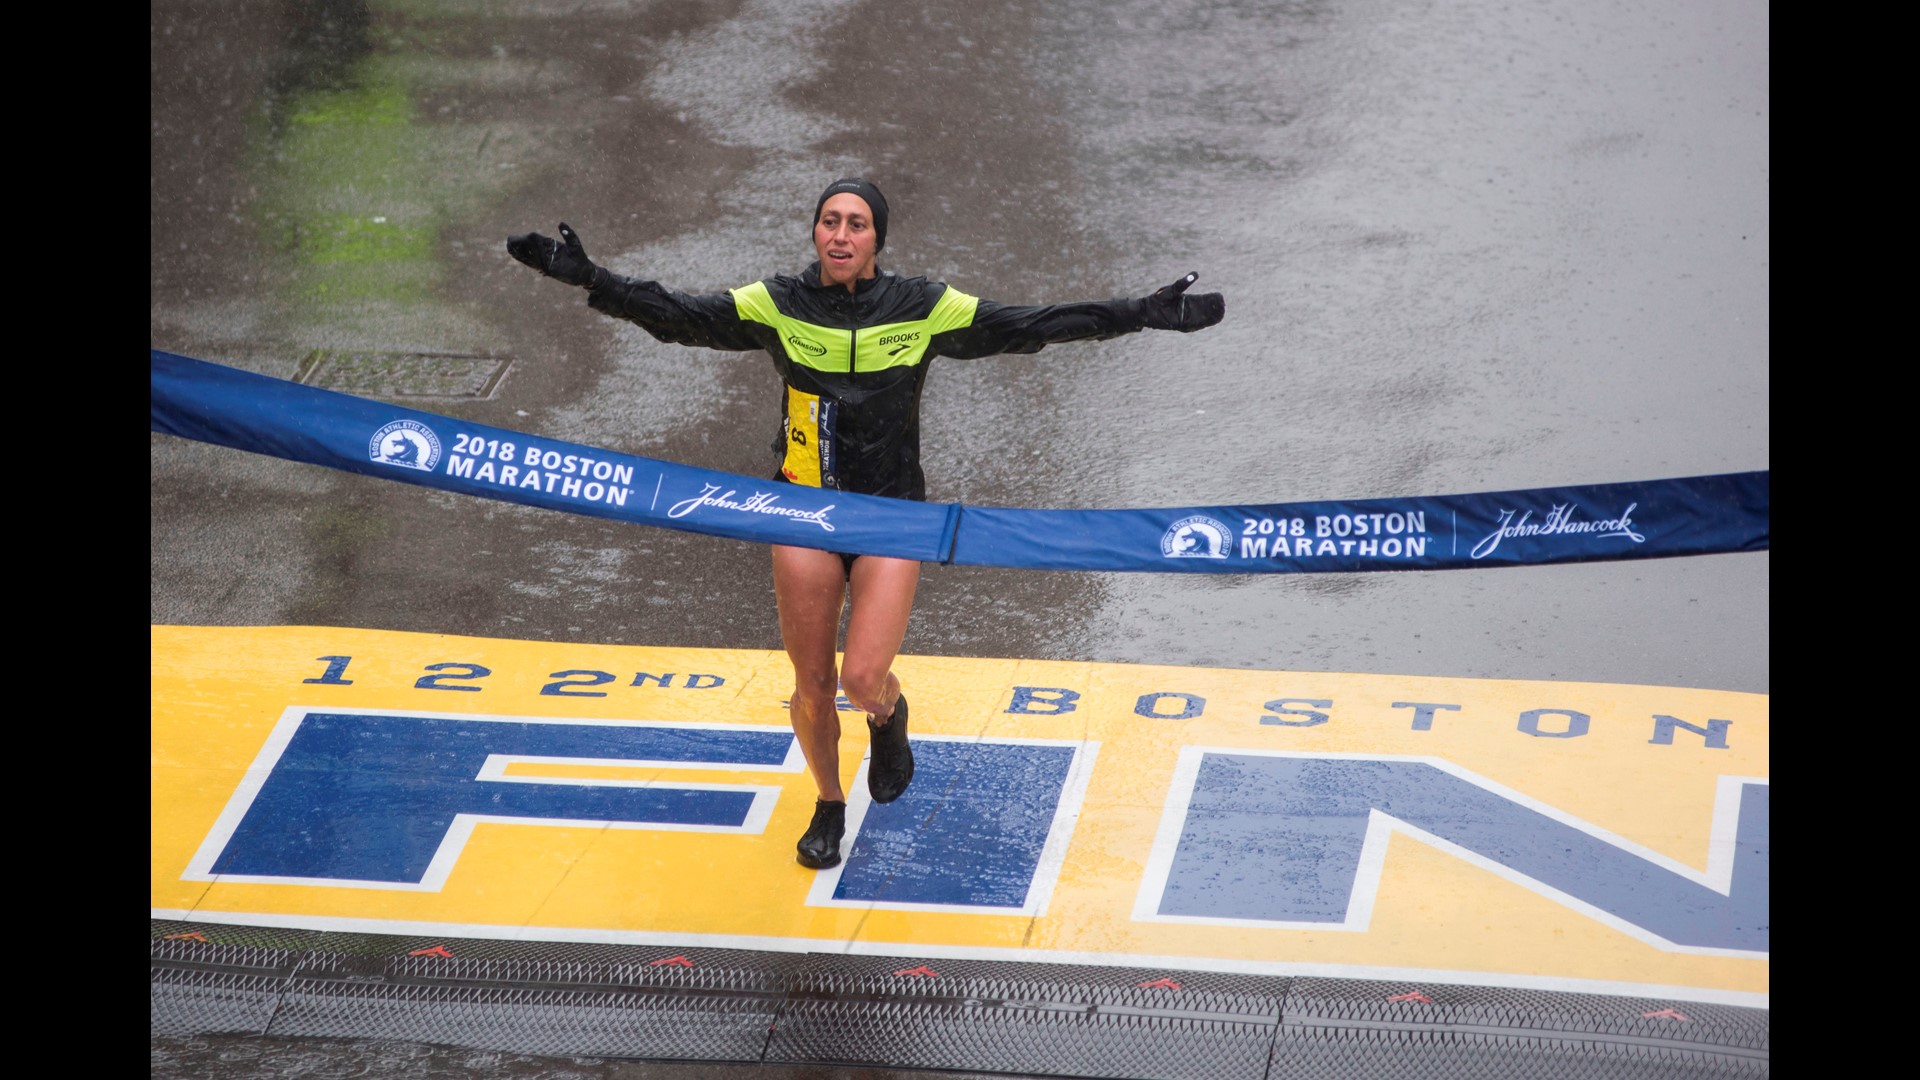 American woman wins Boston Marathon for 1st time in 33 years